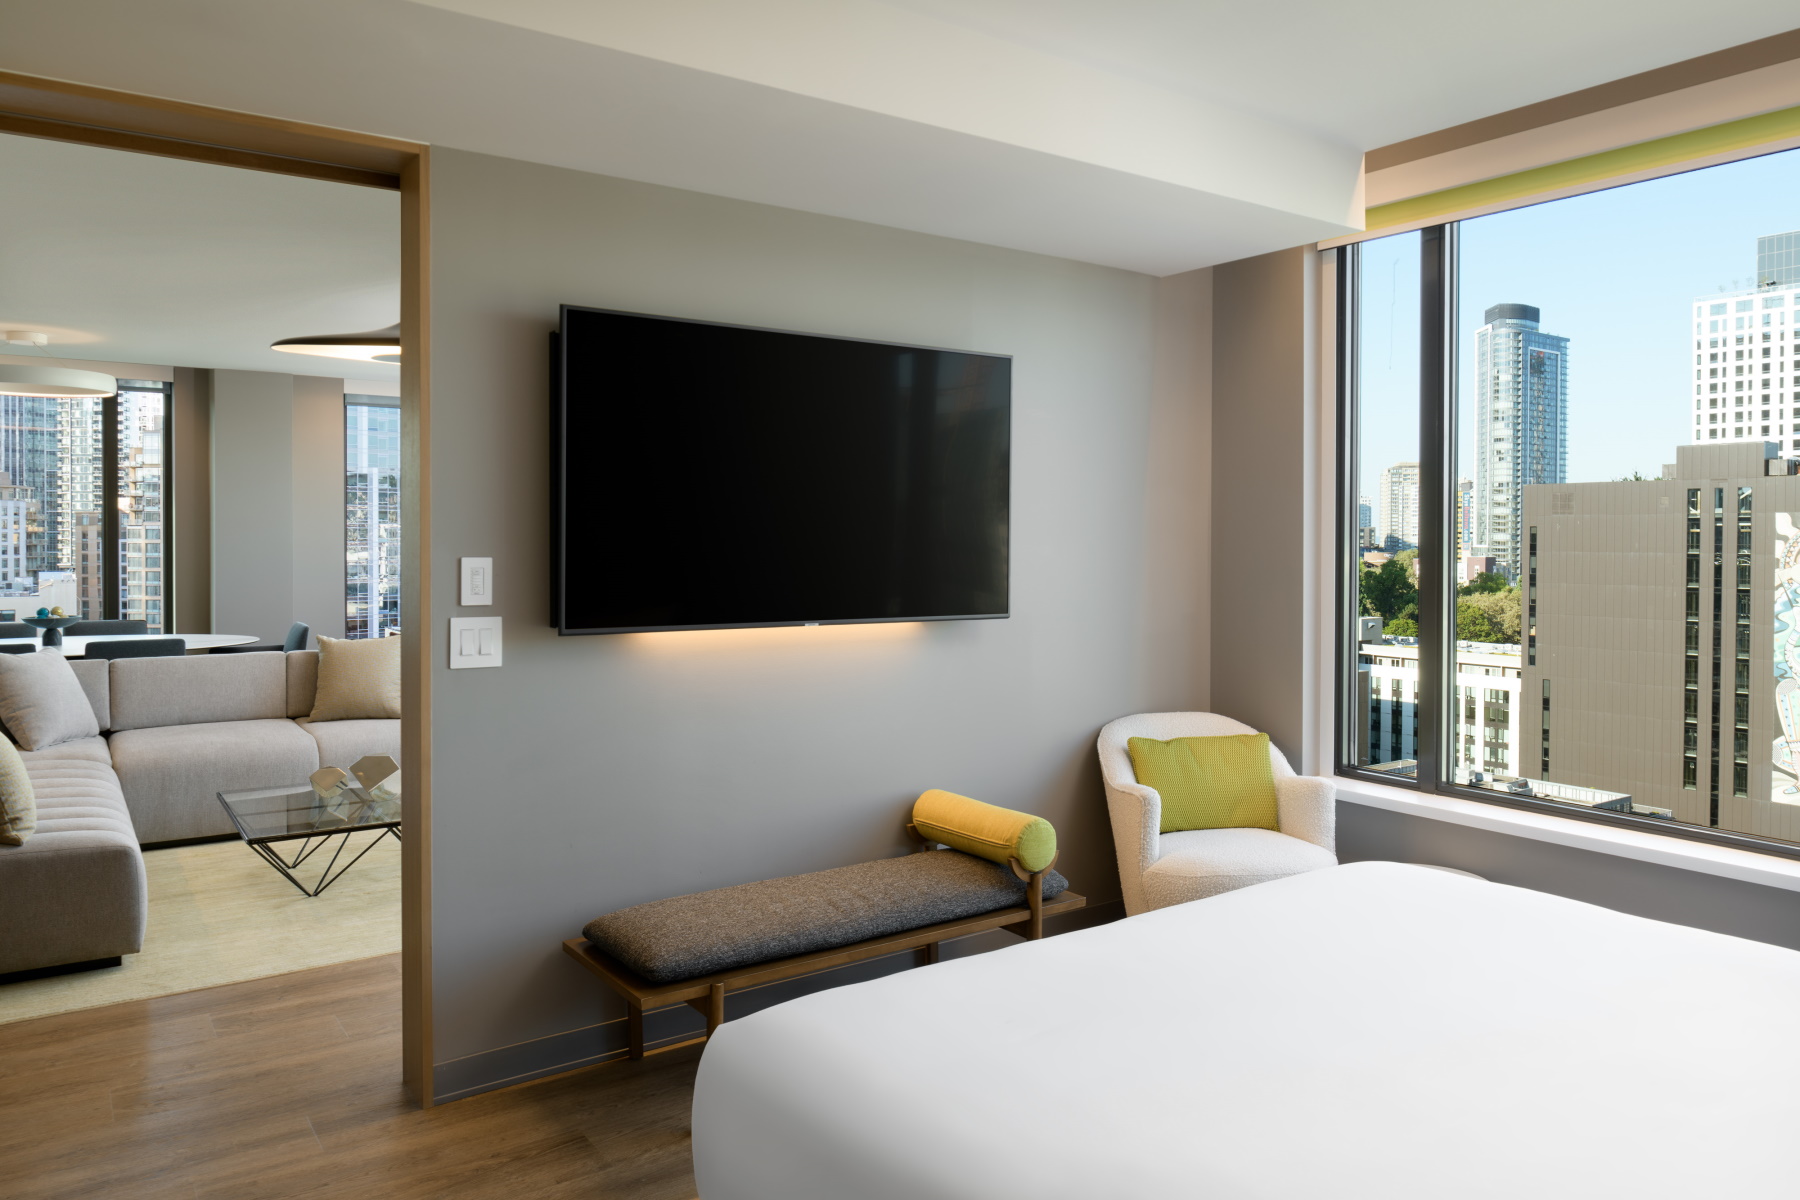 tp_seatn_small_pres_king_bedroom_space_needle_view 3